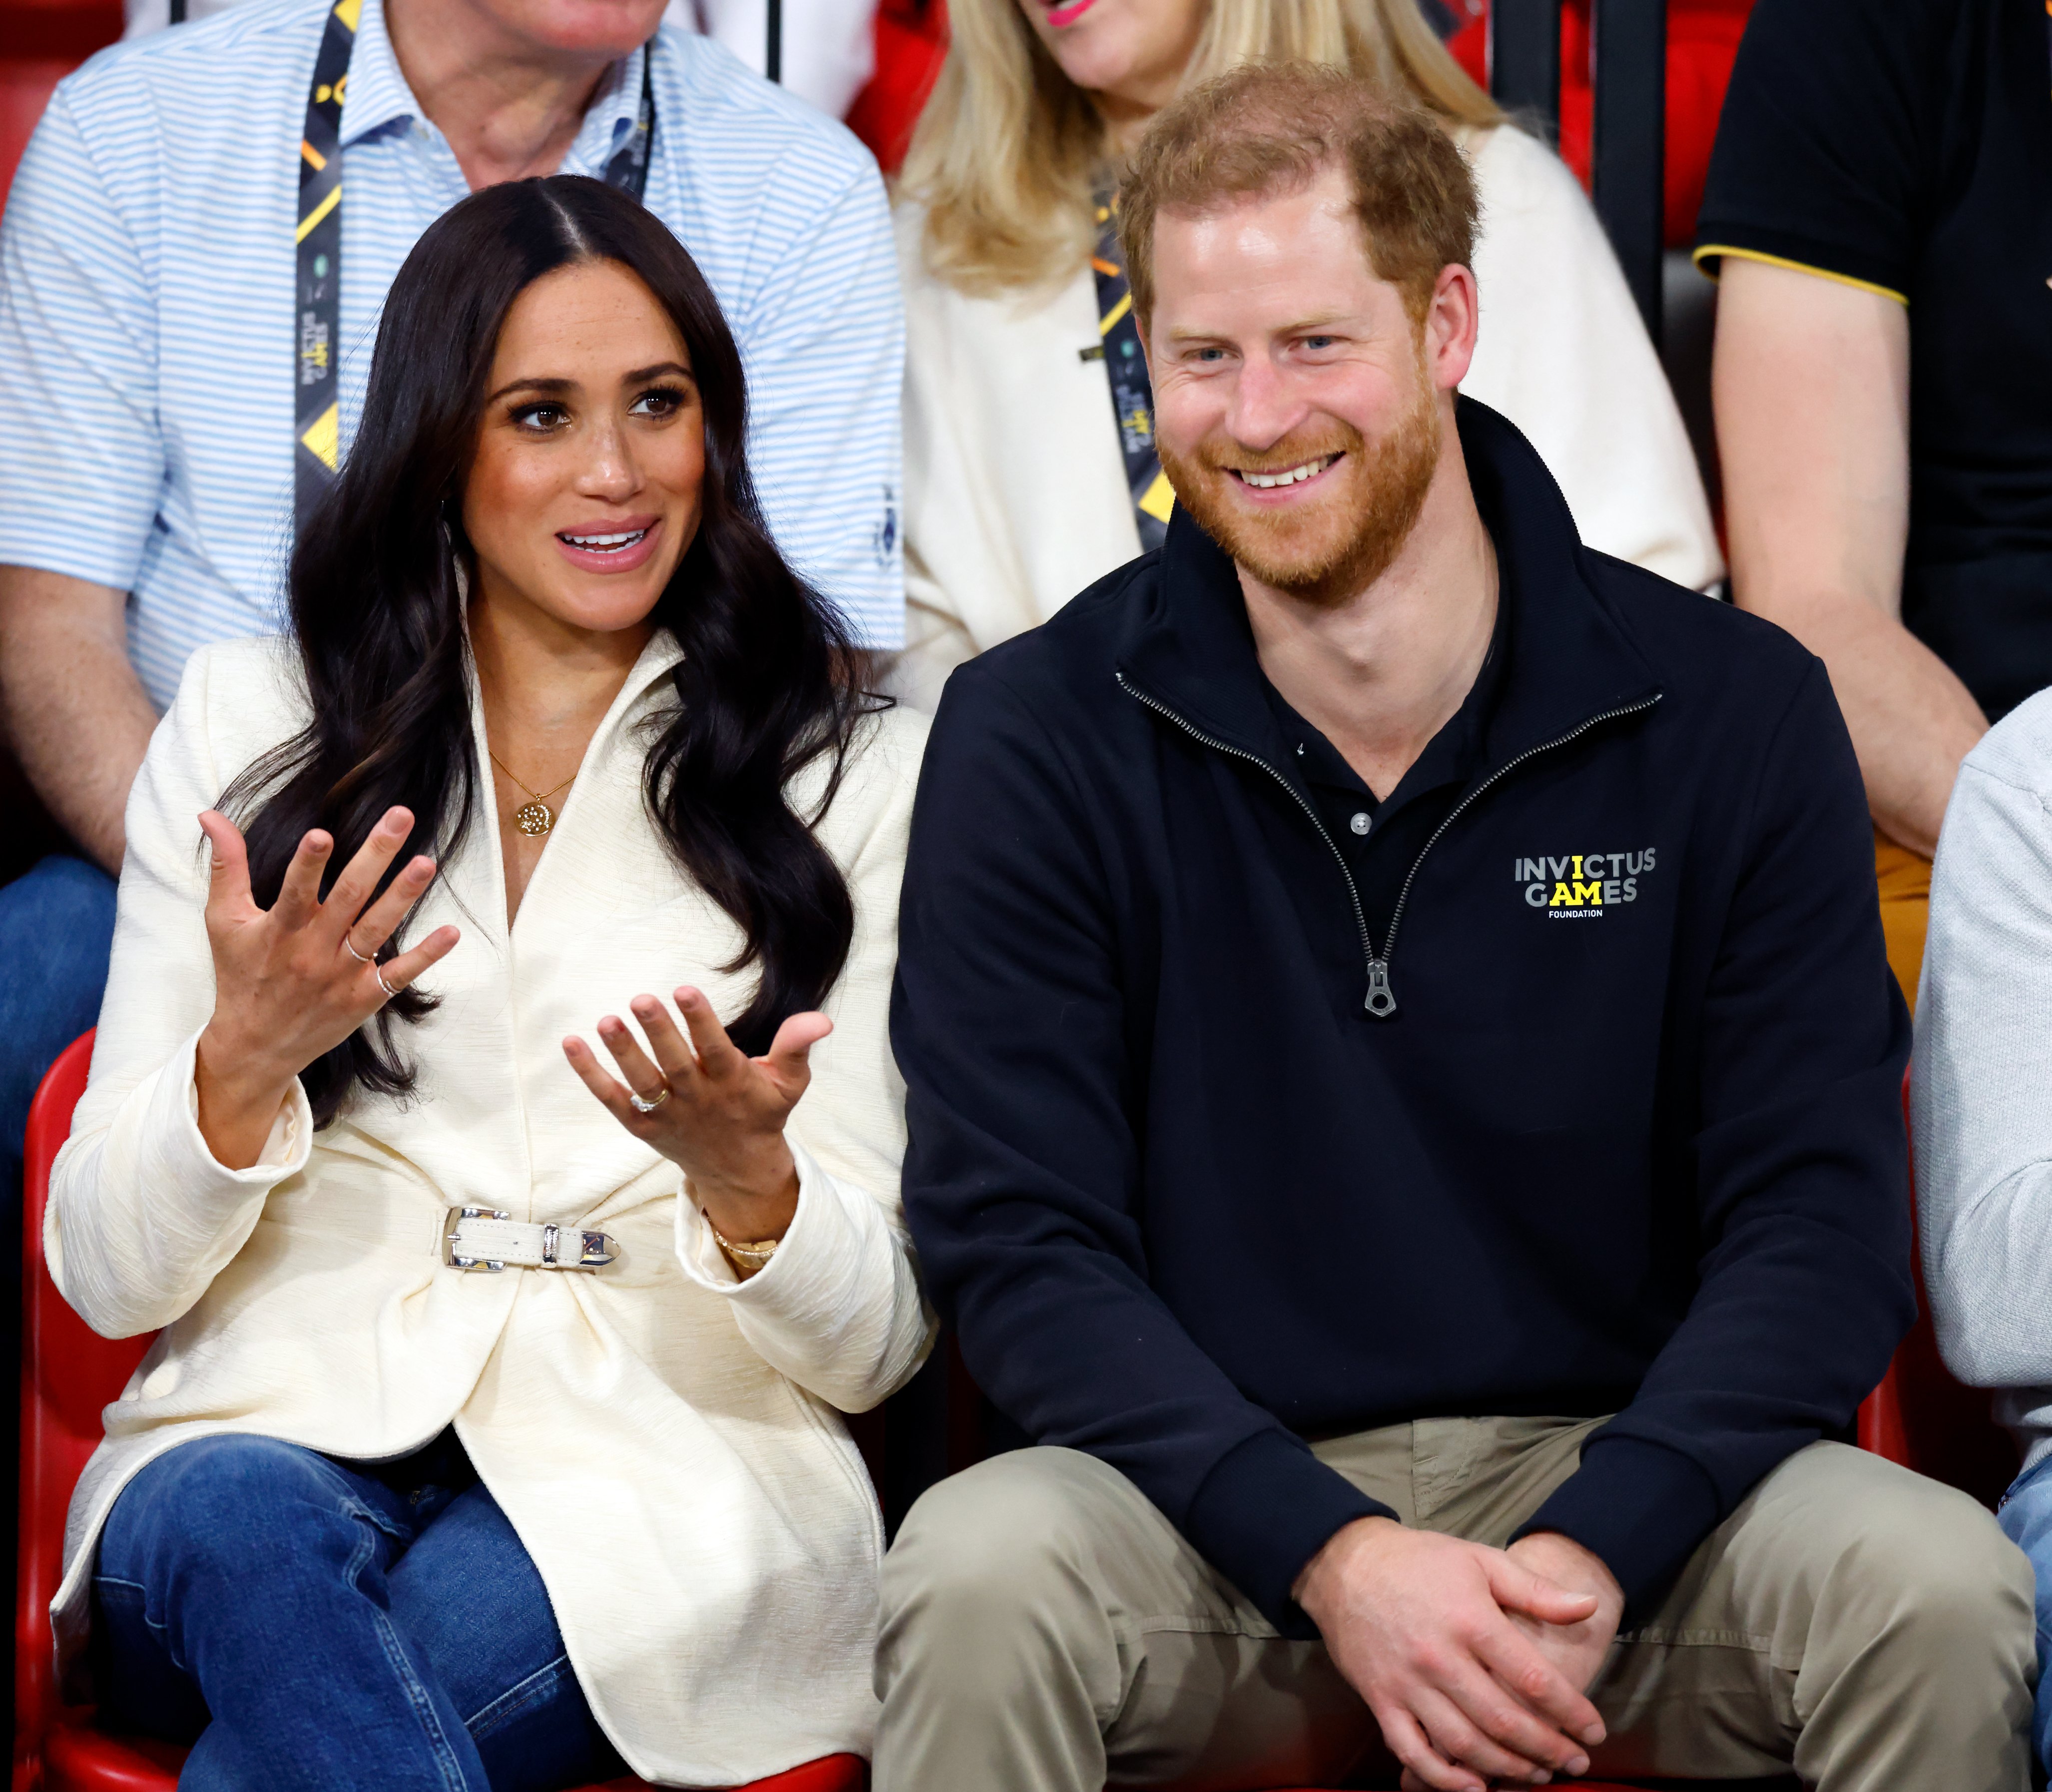 Meghan and Prince Harry watched the sitting volleyball competition on day 2 of the Invictus Games 2020 at Zuiderpark on April 17, 2022, in The Hague, Netherlands. | Source: Getty Images